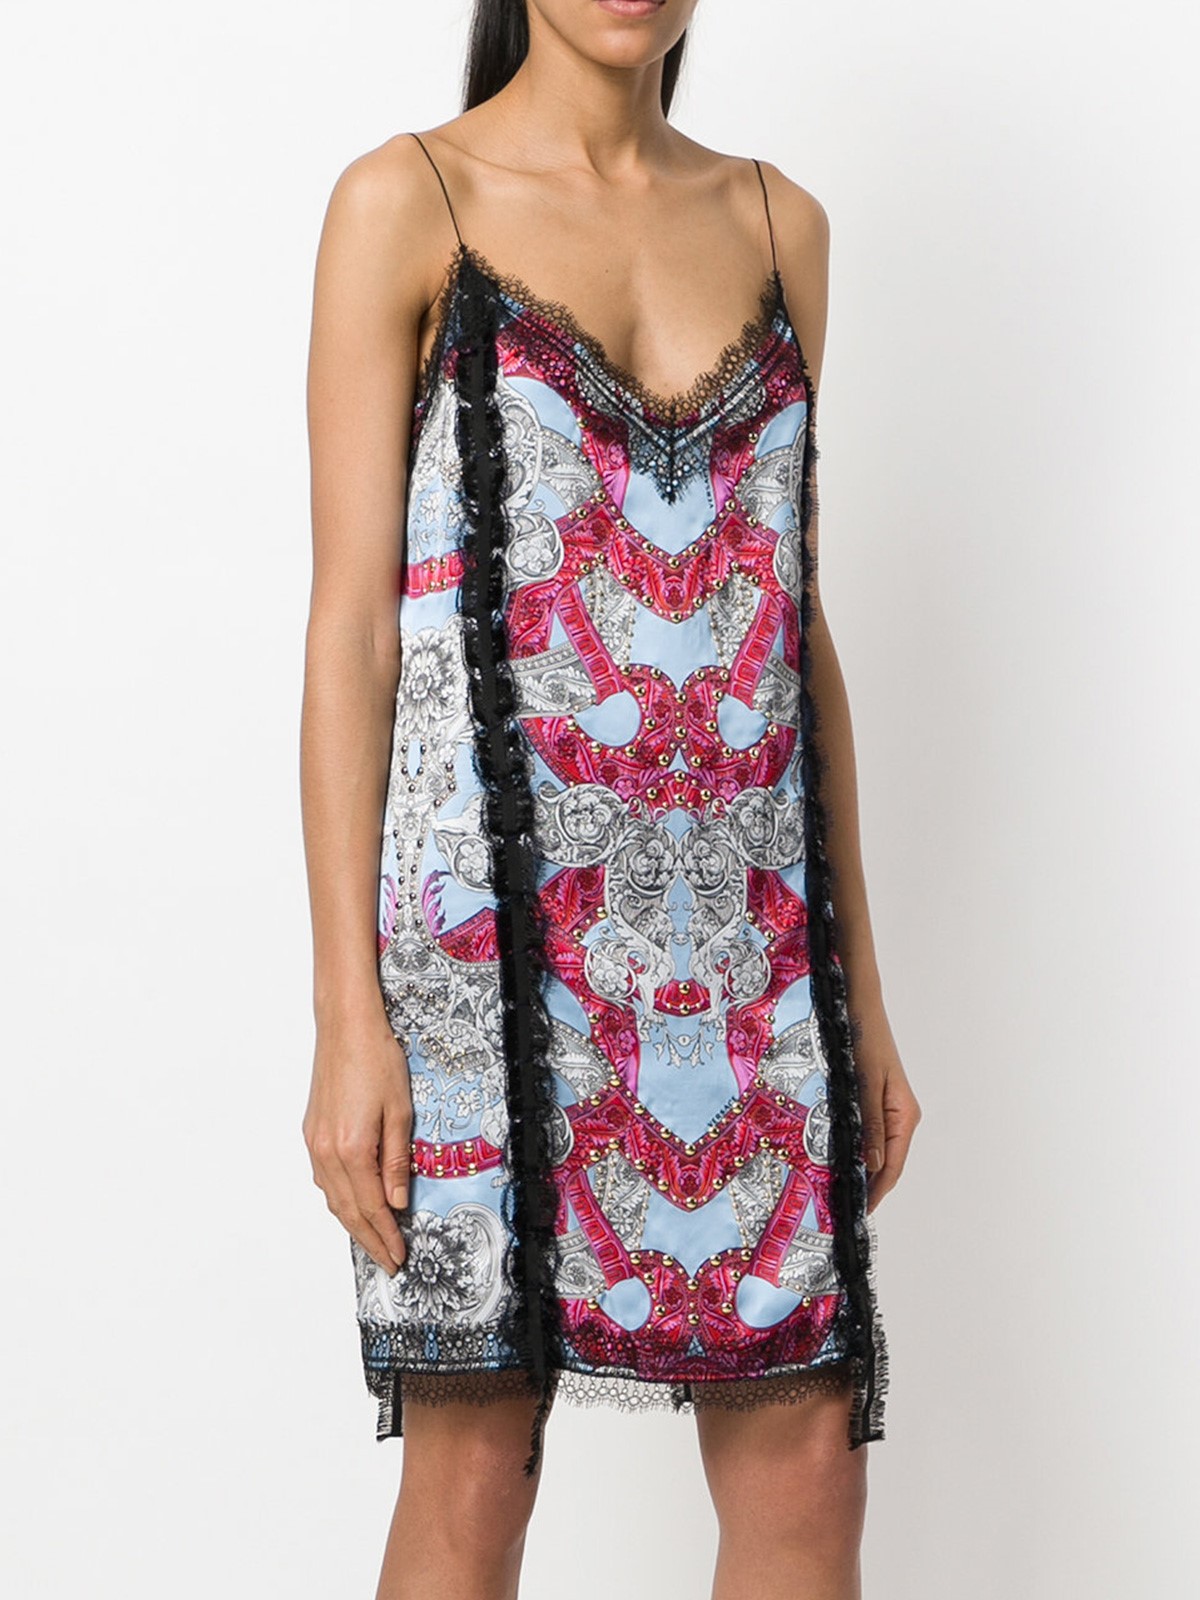 versace PRINTED LACE DRESS available on 